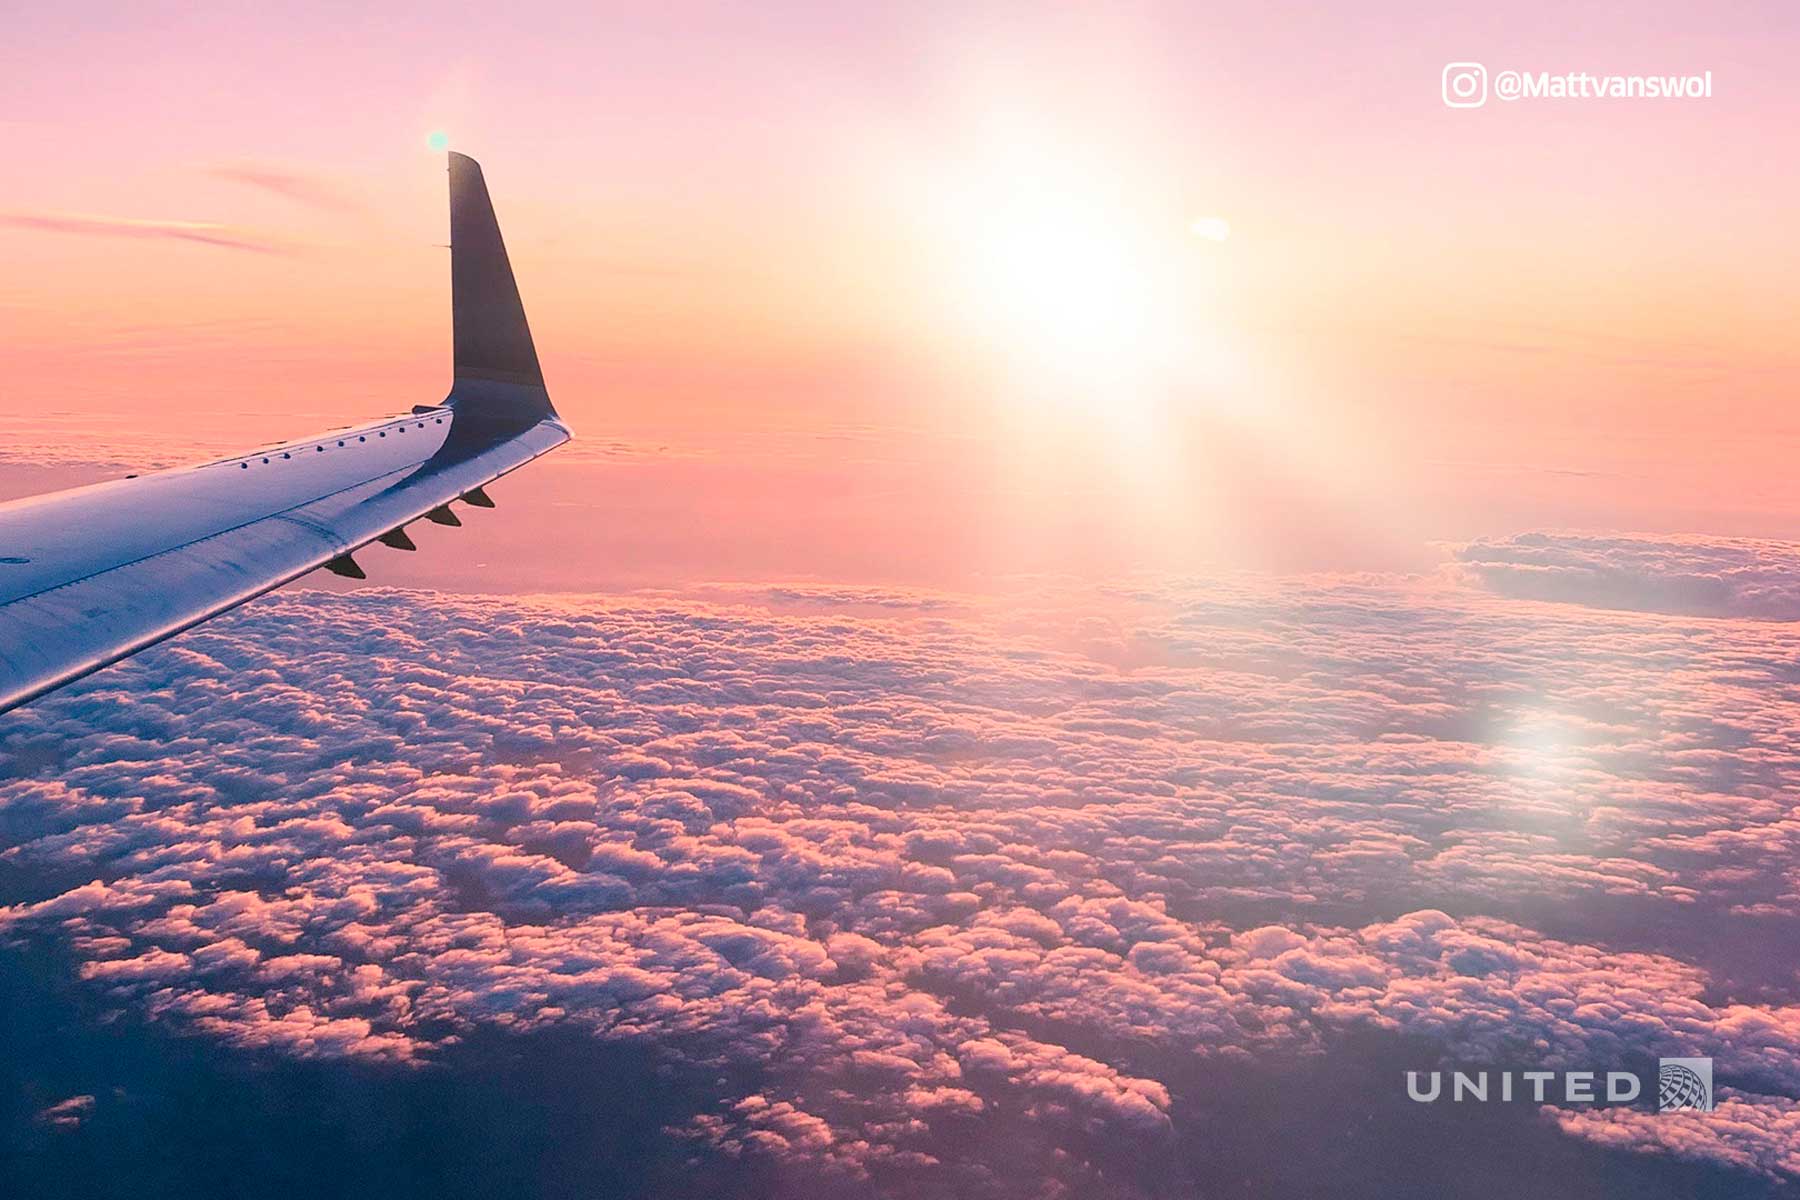 United S New Zoom Background Will Make It Look Like You Re Flying